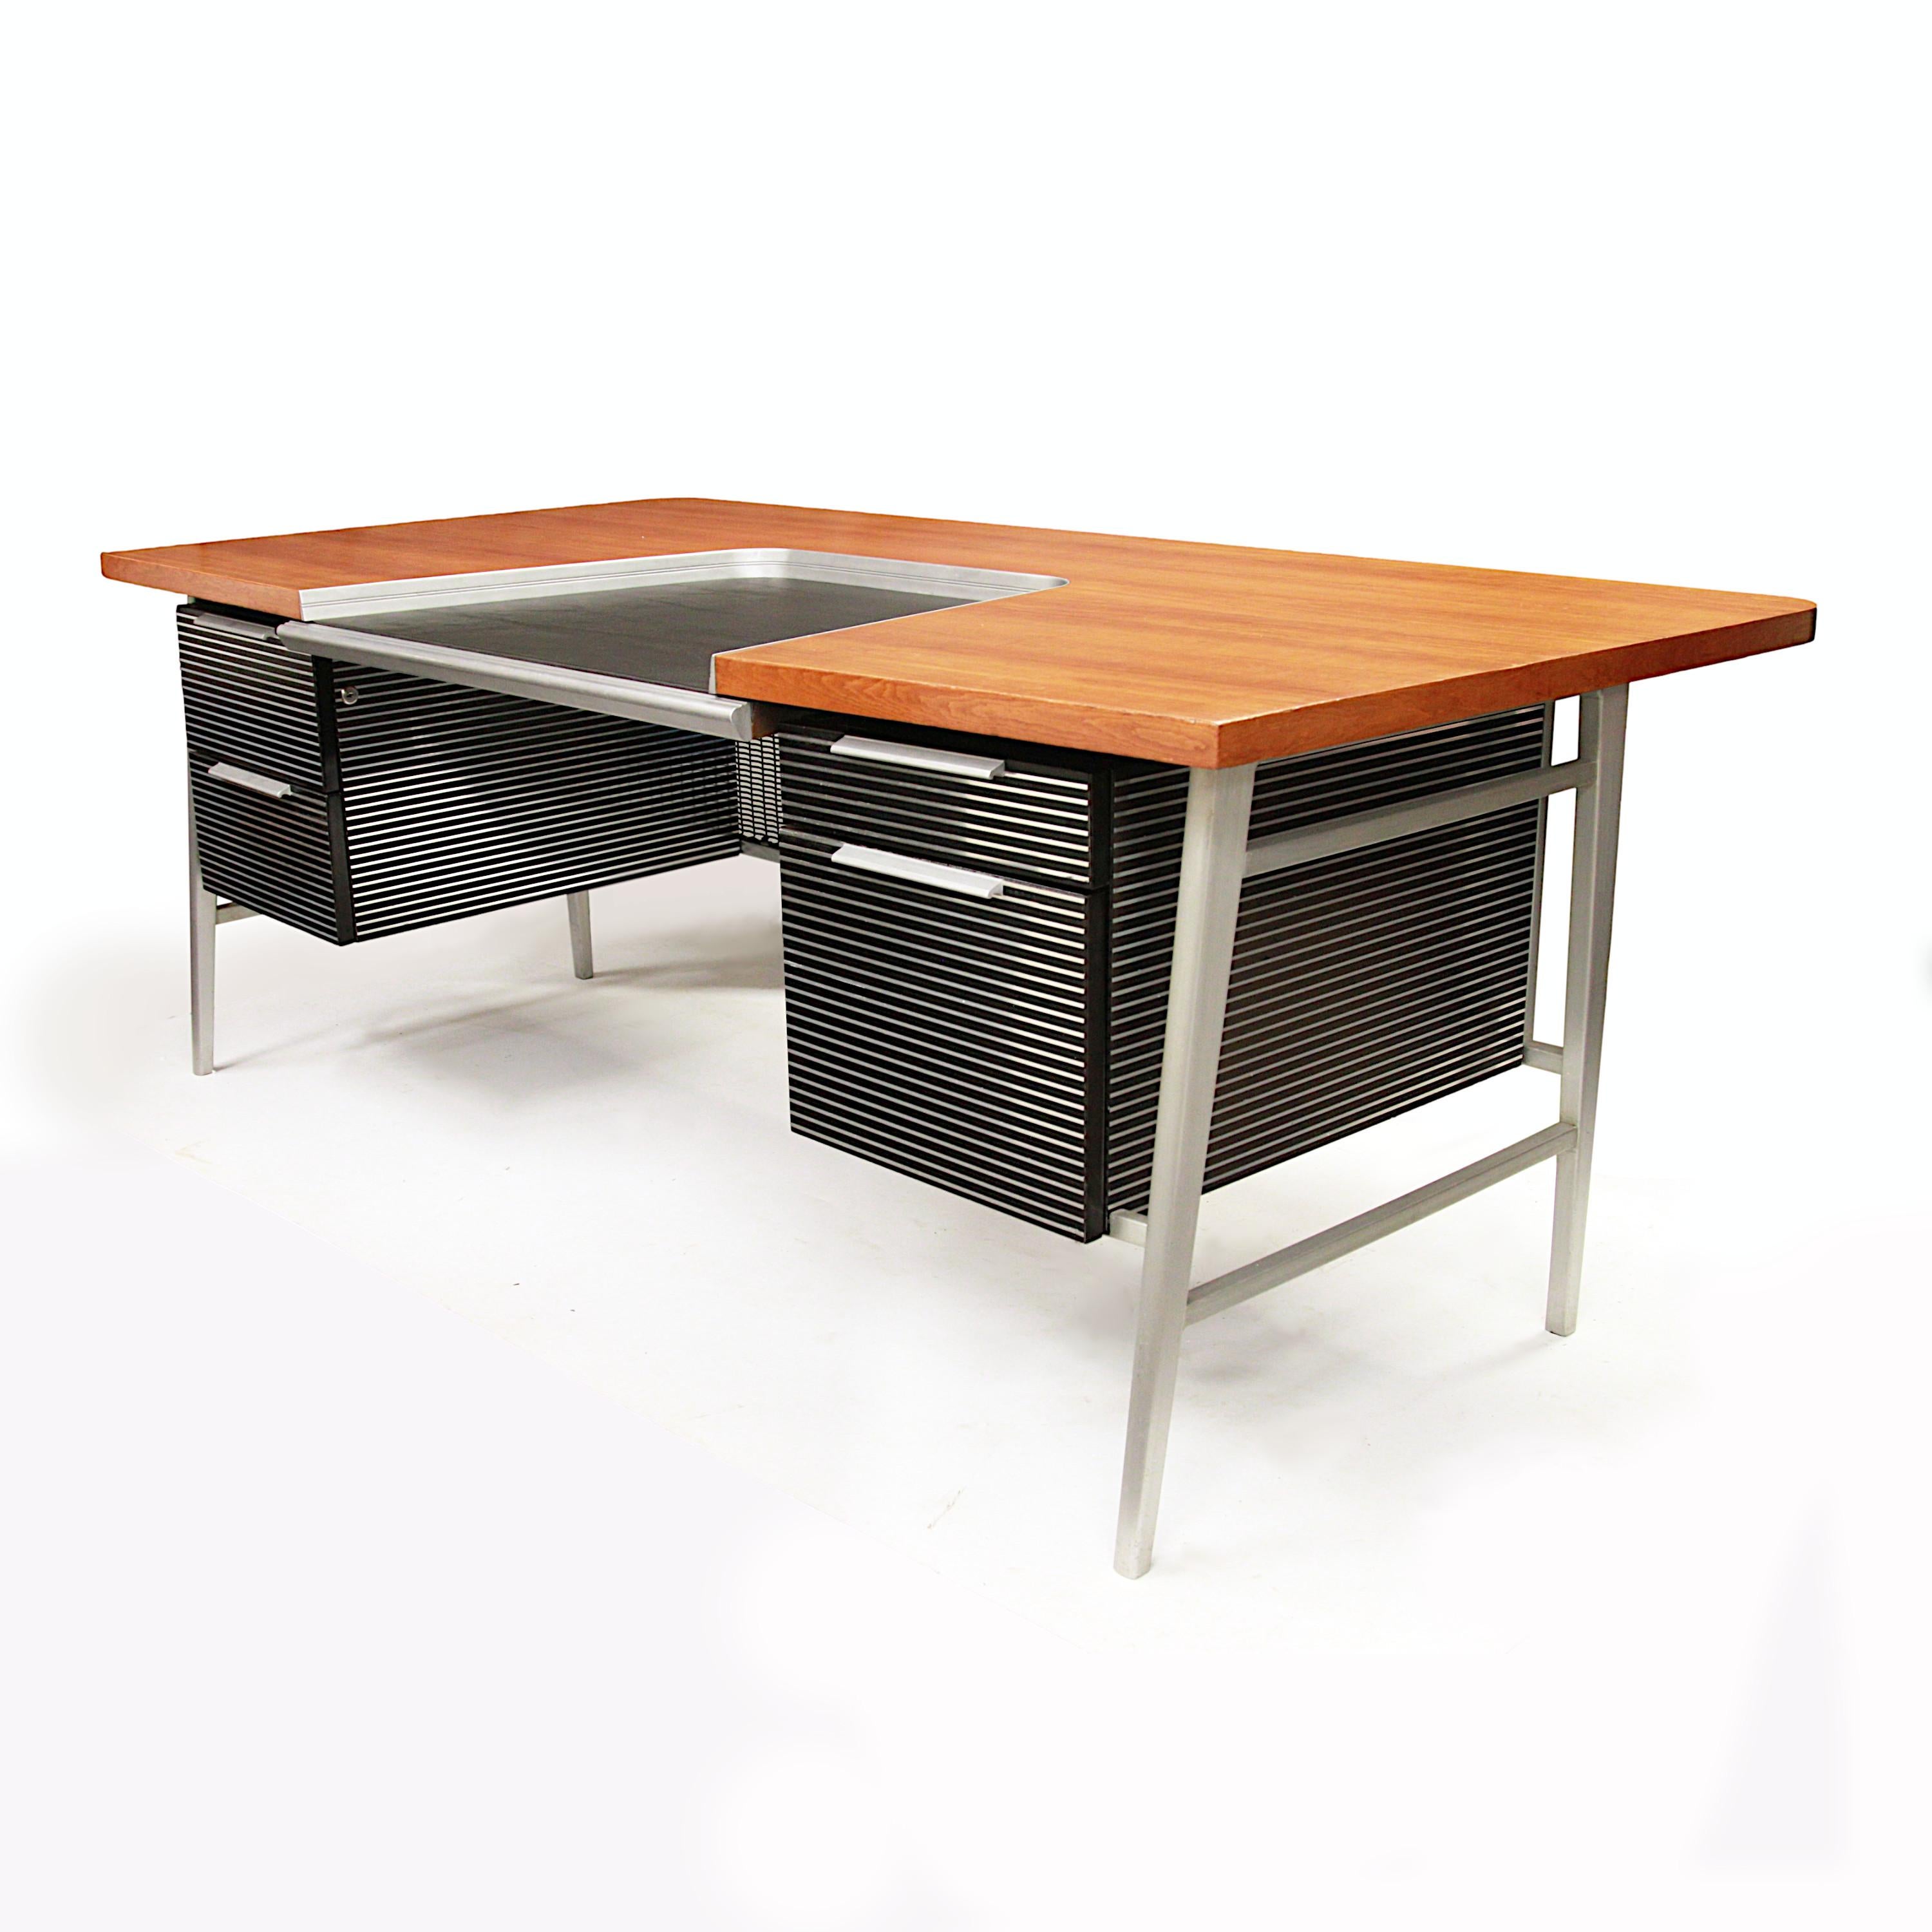 This remarkable piece is one of the most spectacular desk designs to come out of the Mid-Century era.  Designed by architect Gordon Bunshaft for GF Studios (a division of the General Fireproofing Co.), this desk has just about everything going for